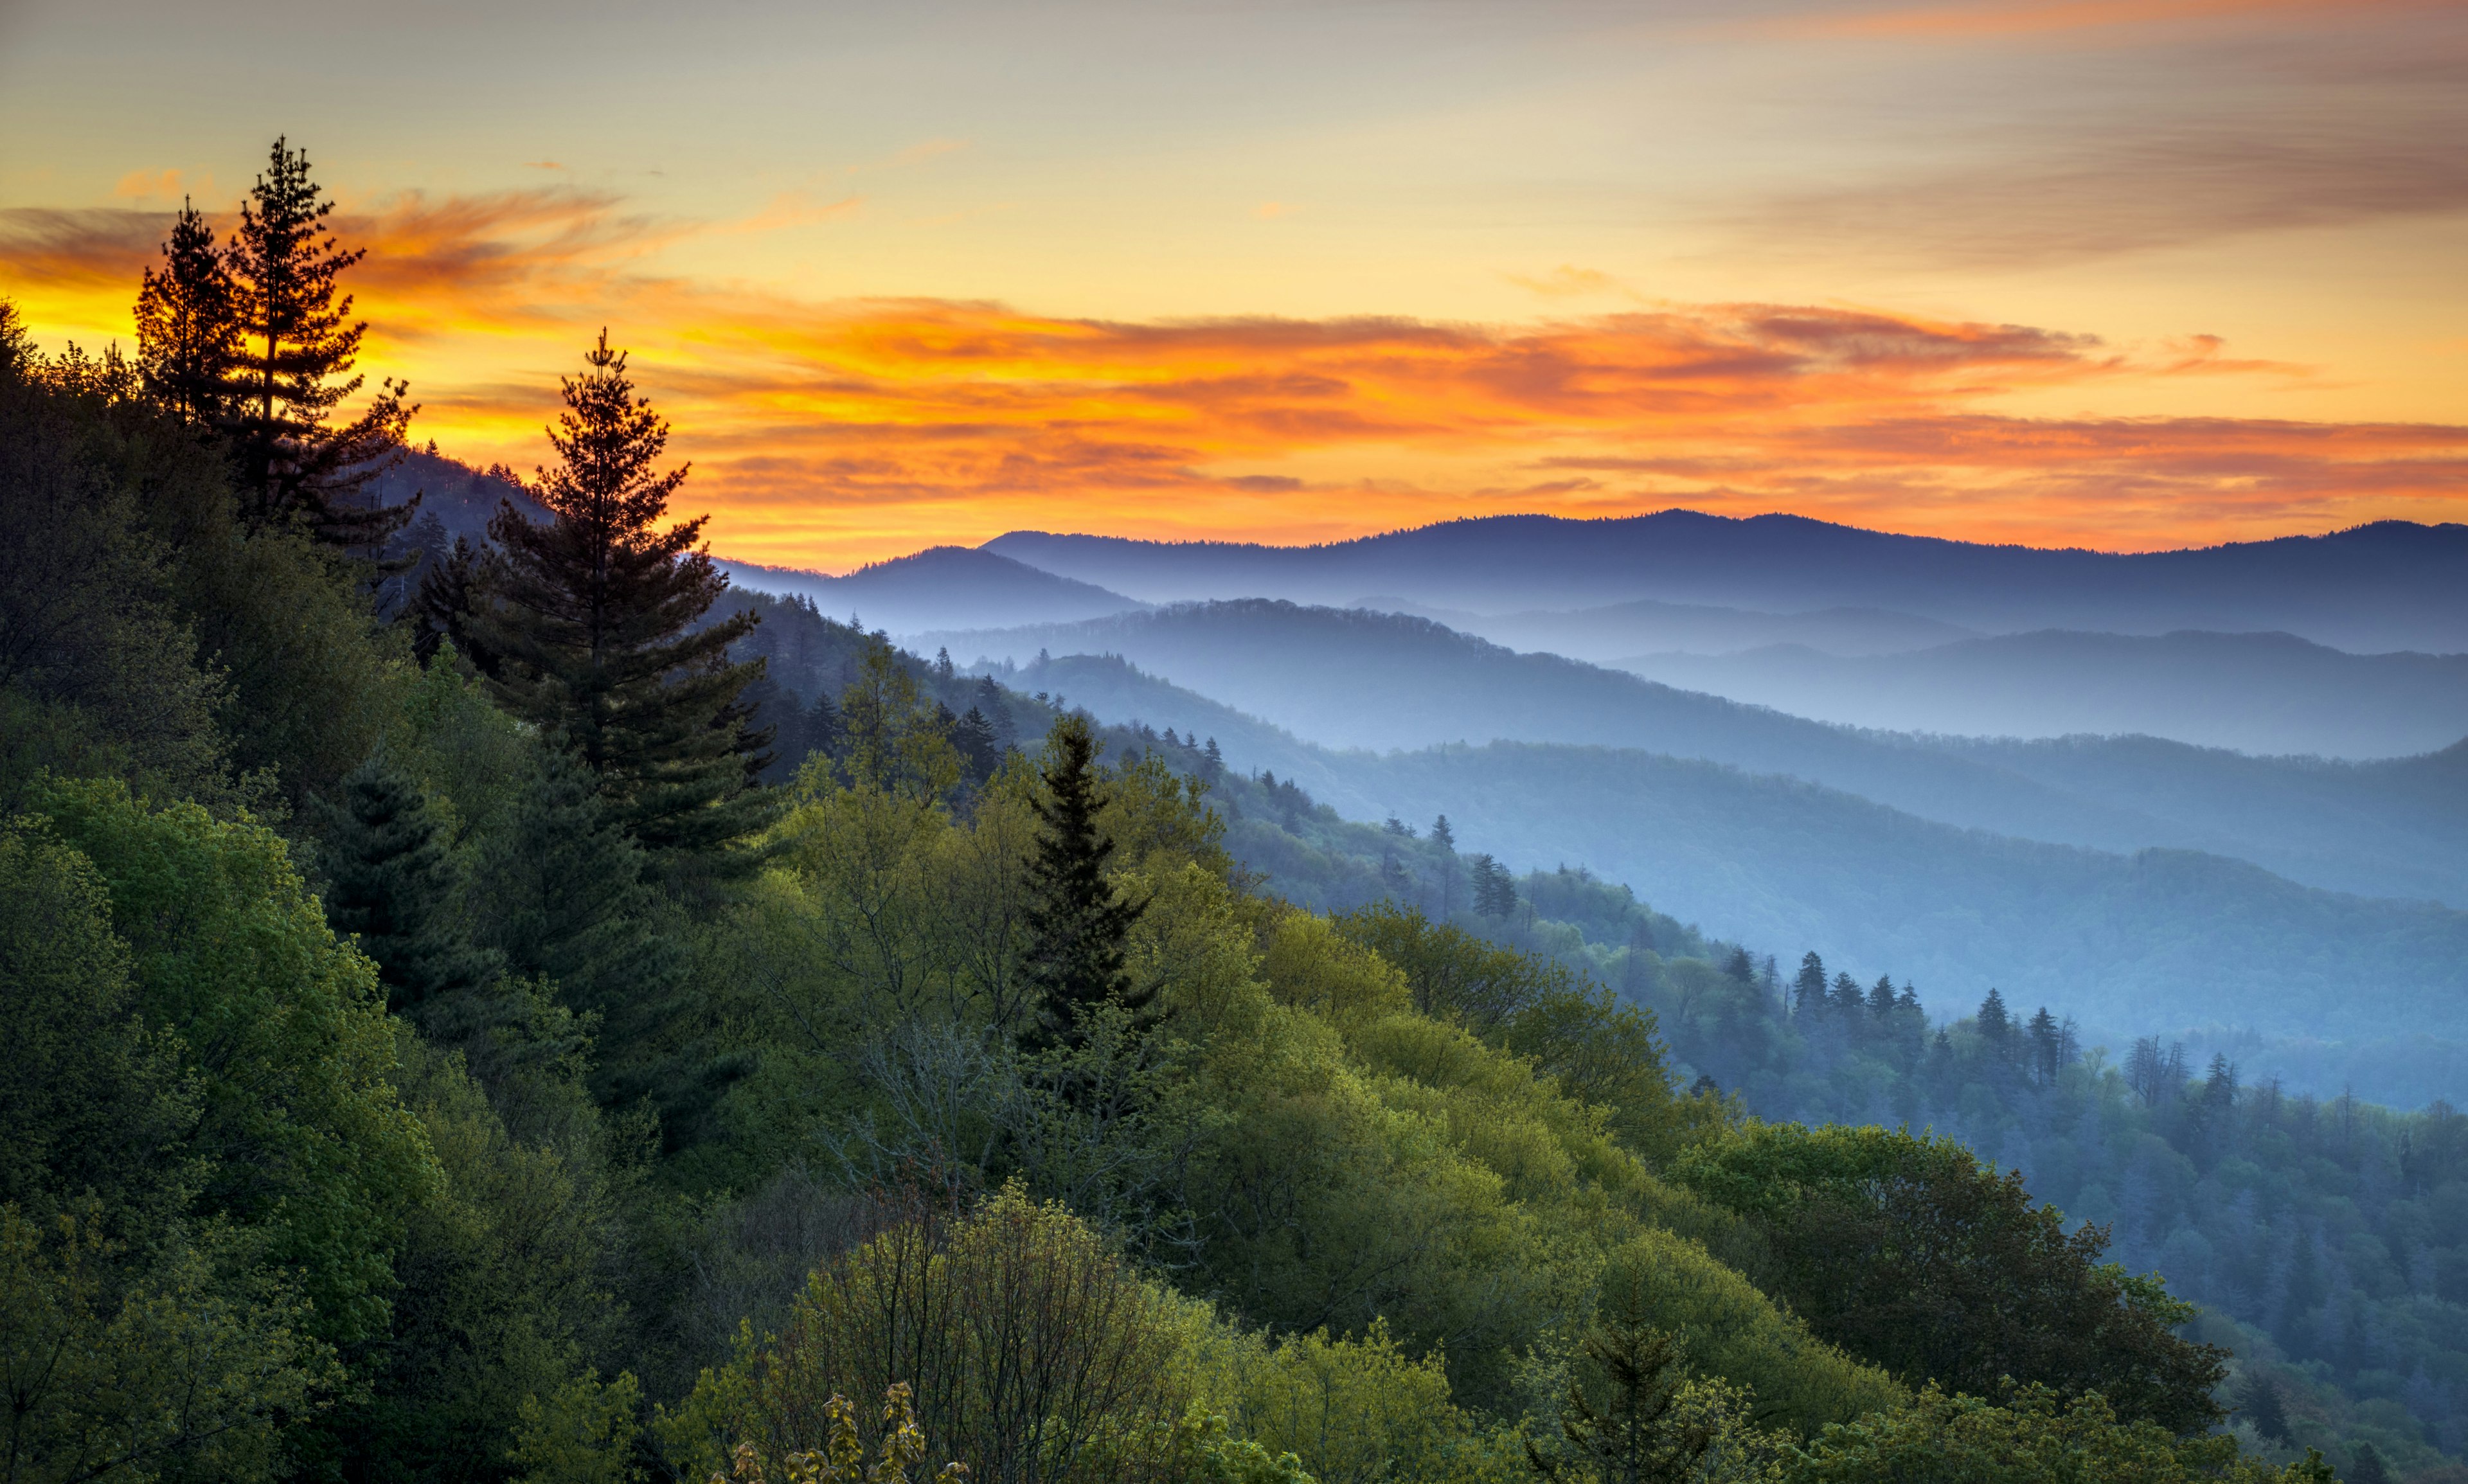 Sunrise over misty hills, as seen from Oconaluftee Overlook in the Great Smoky Mountains National Park.